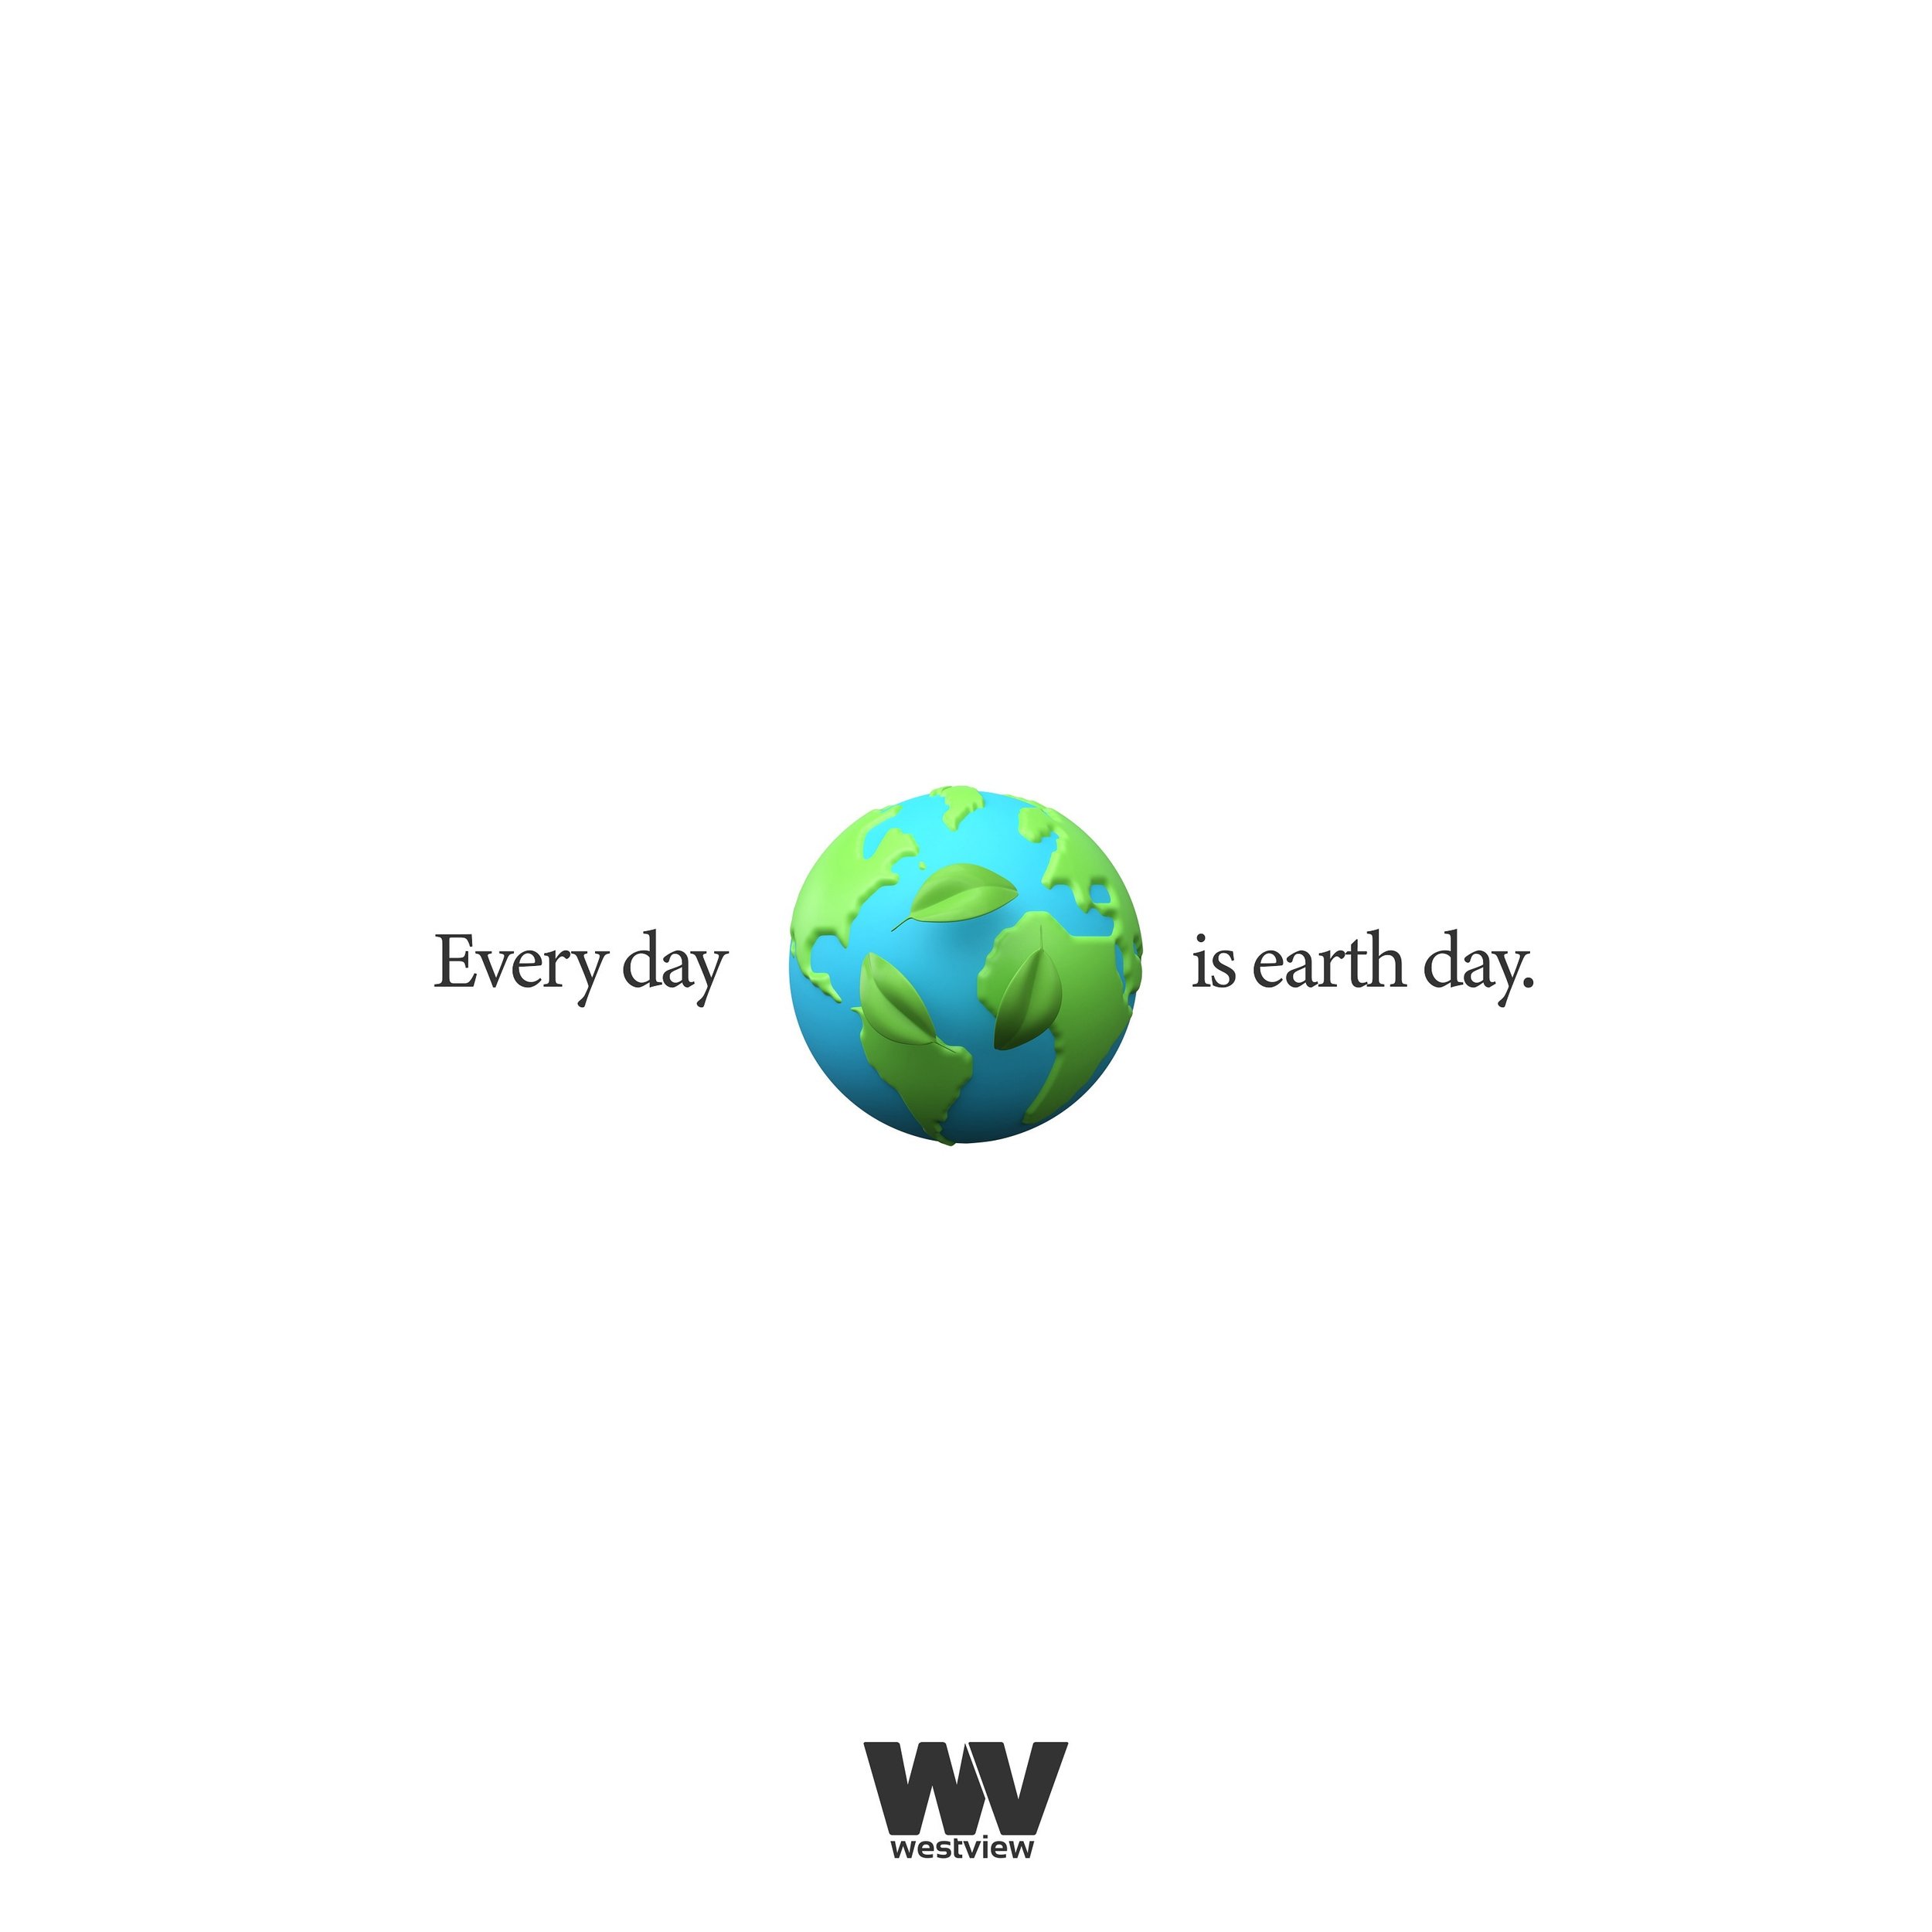 Earth Day is a reminder of the importance of environmental conservation and sustainability, encouraging us to come together and take action for a healthier planet and brighter future. 

Westview is committed to pushing ourselves and our industry part